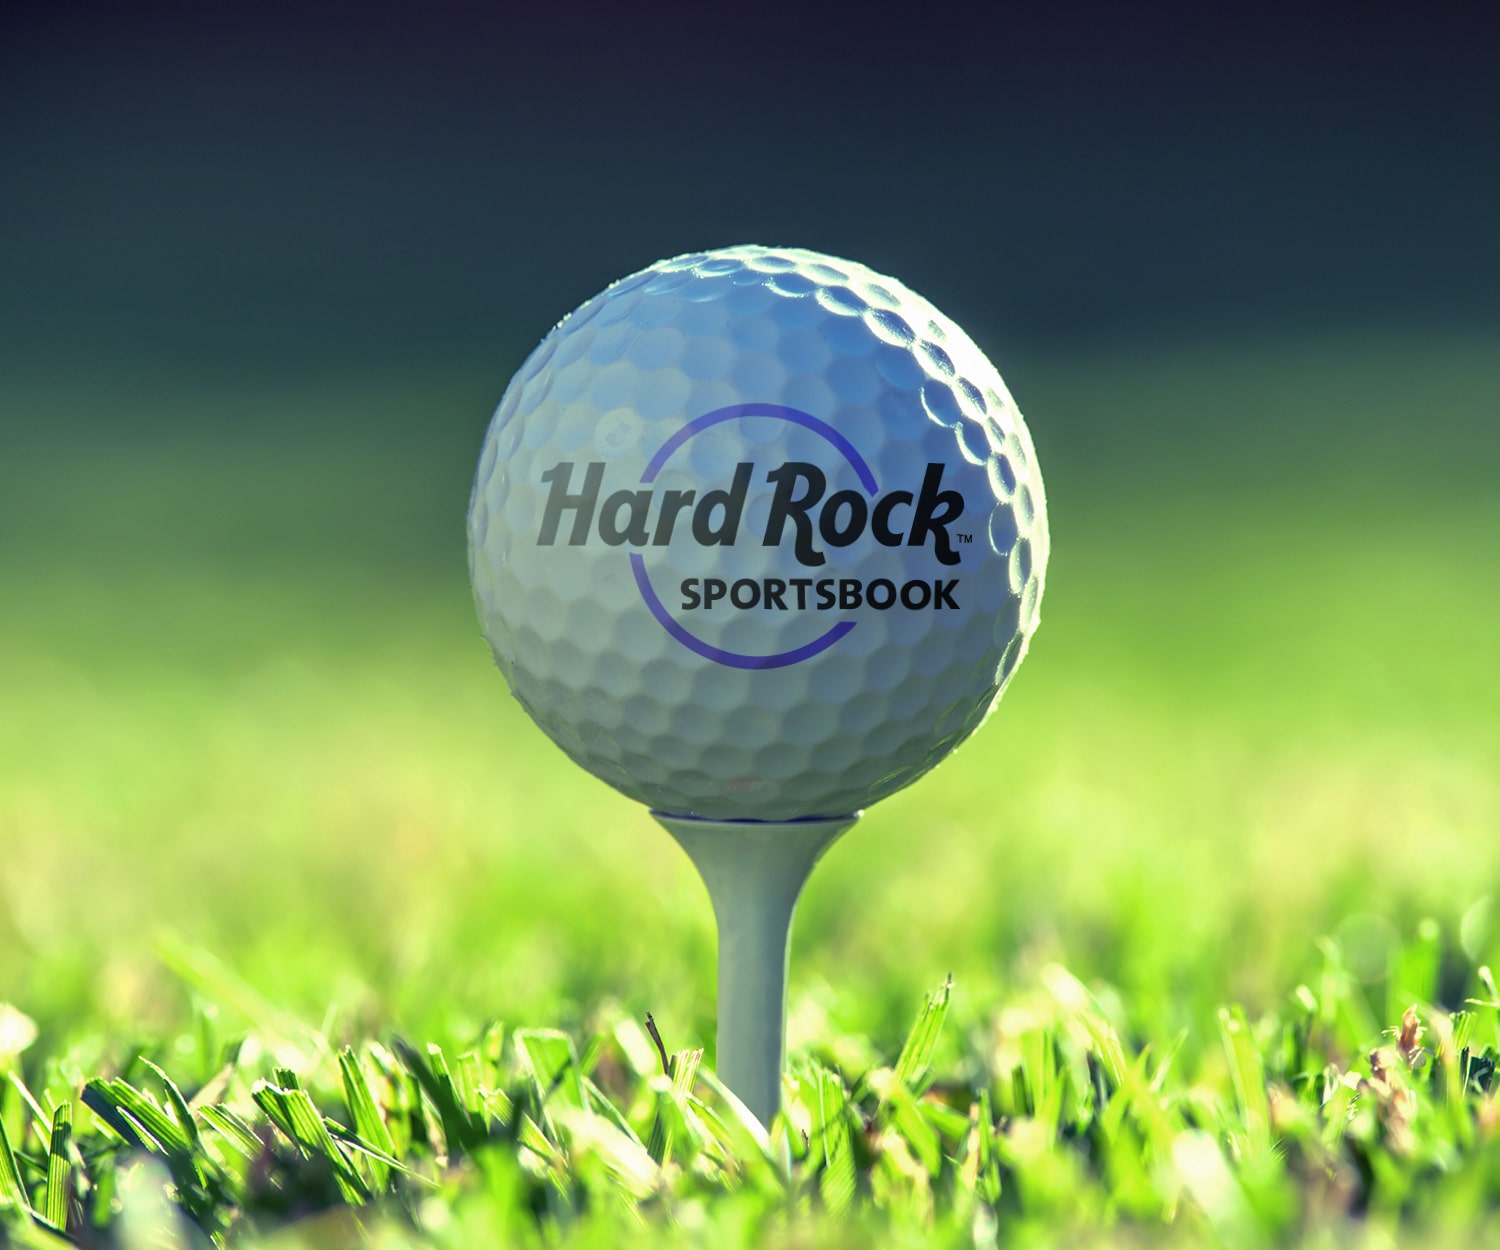 Tee Up Hard Rock Sportsbook For Golf This Weekend